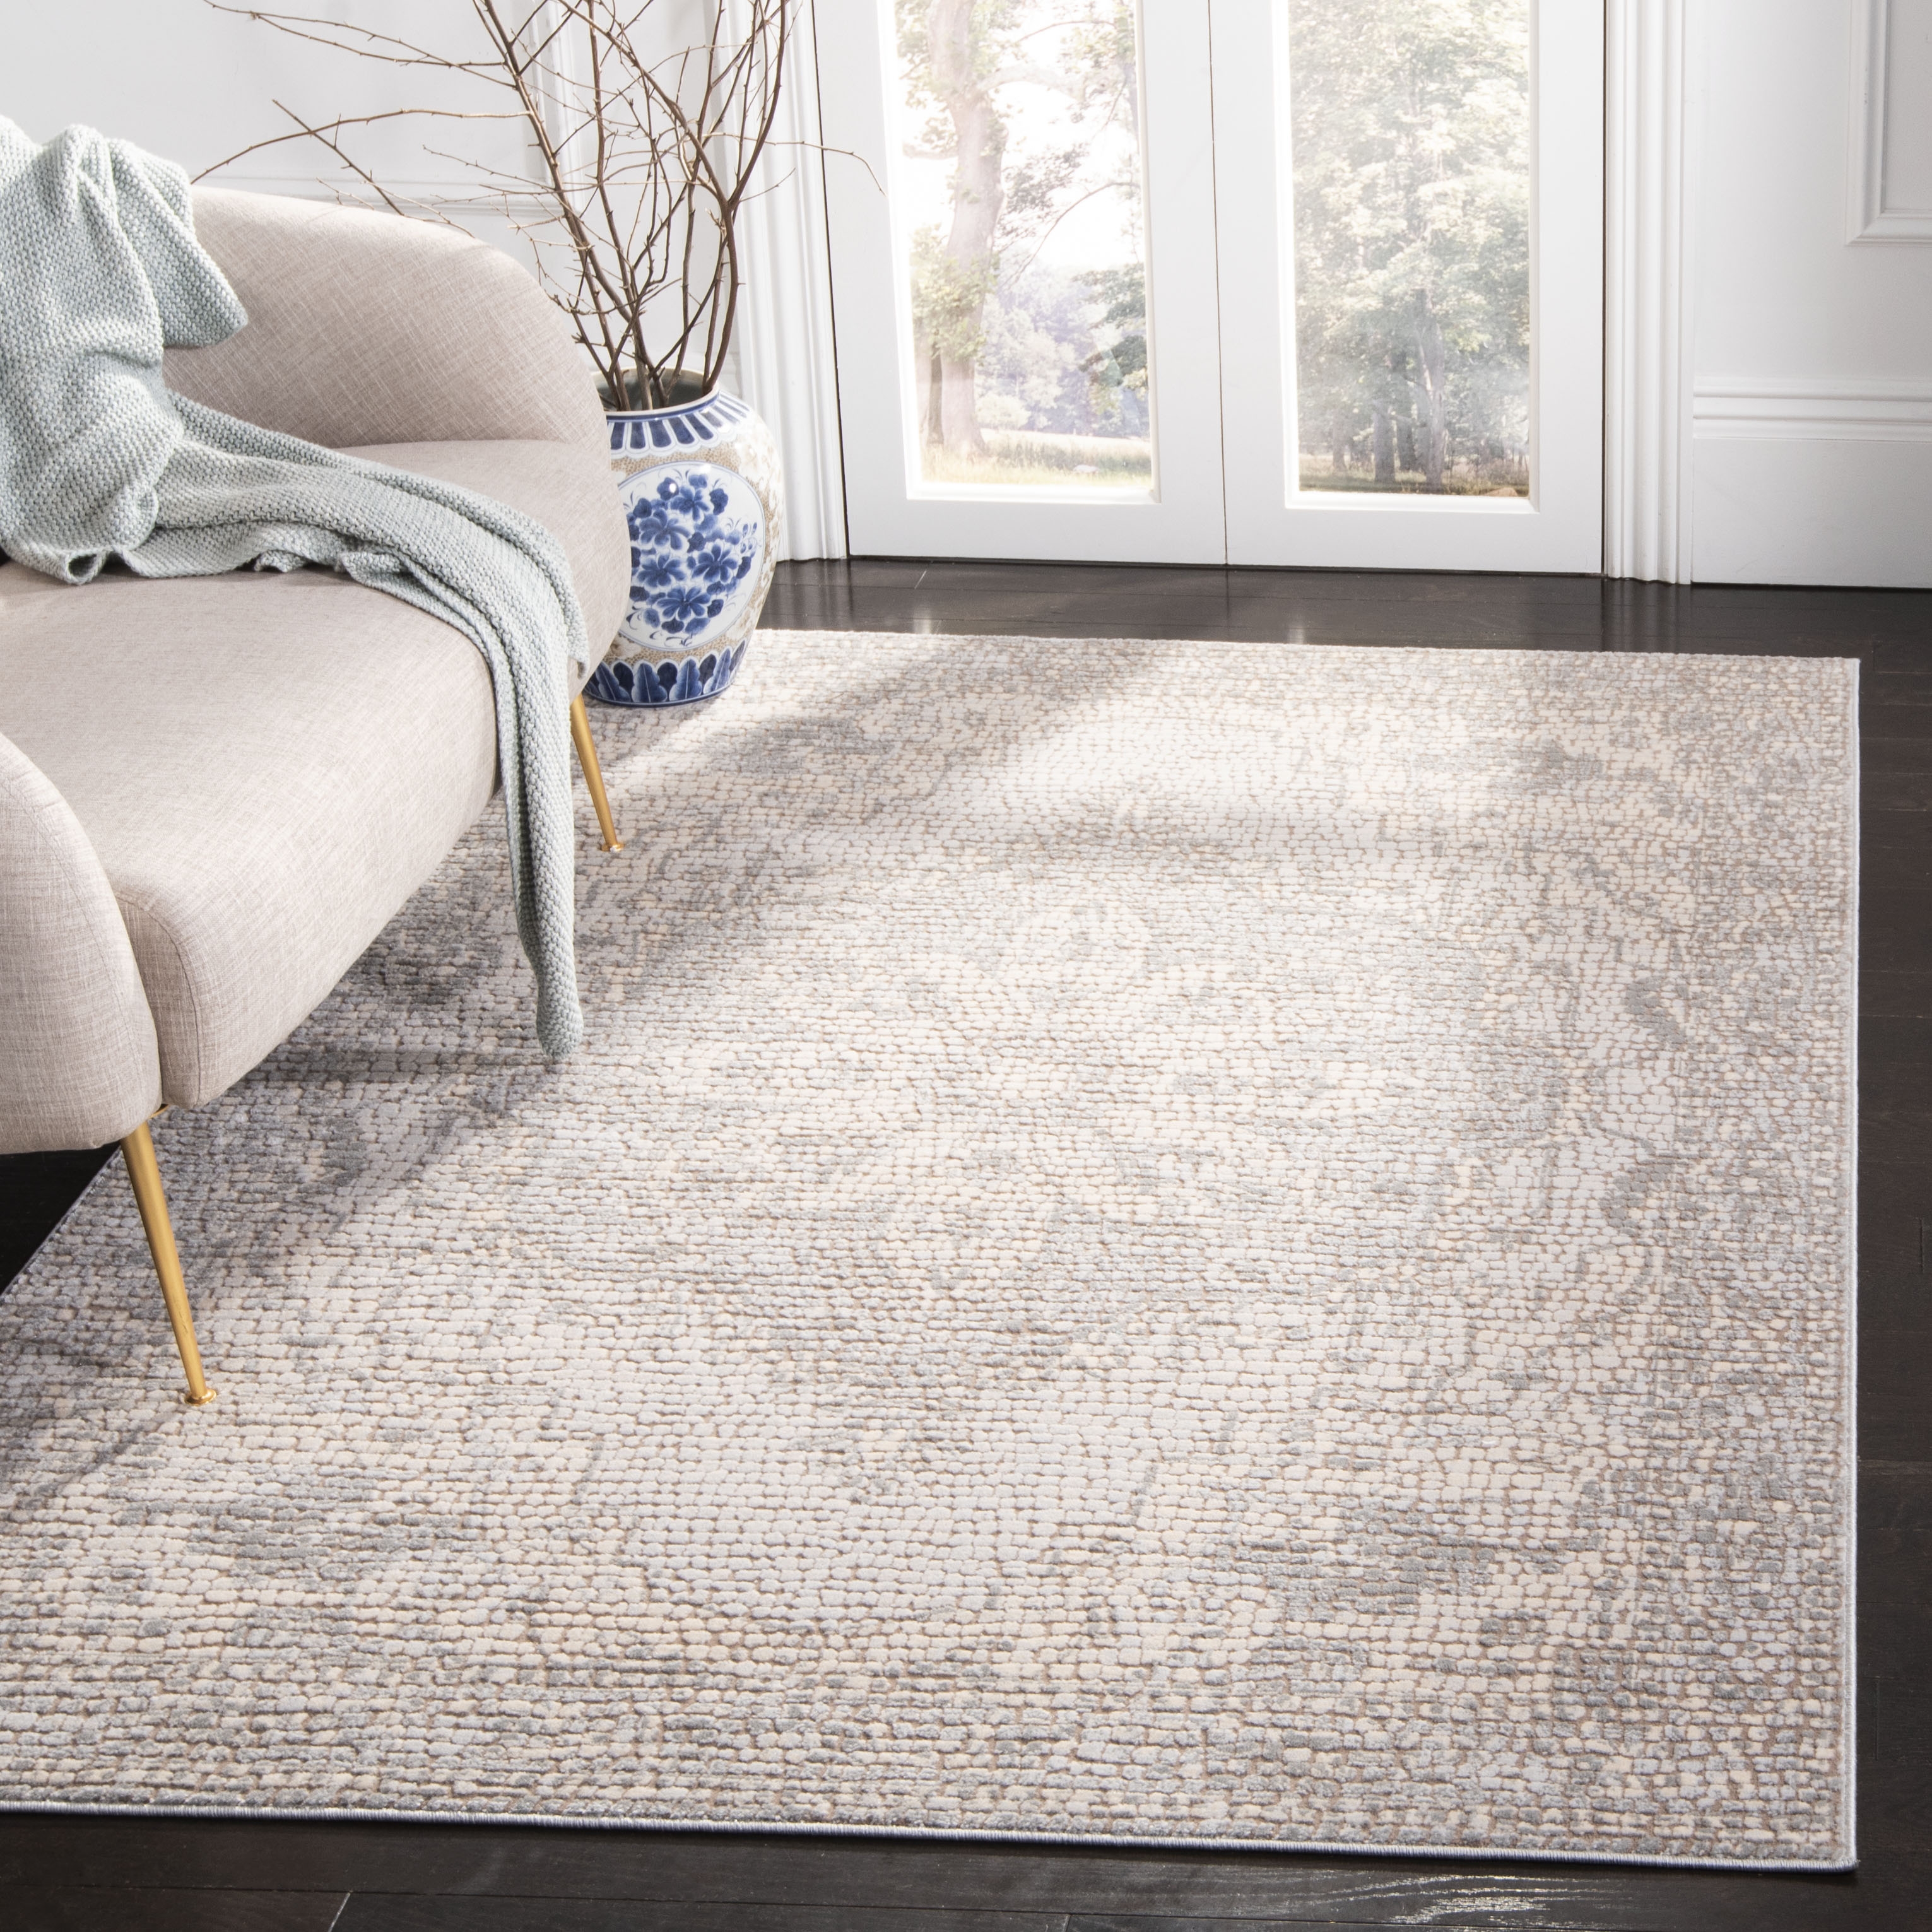 Arlo Home Woven Area Rug, MAR412G, Silver/Ivory,  4' X 6' - Image 1